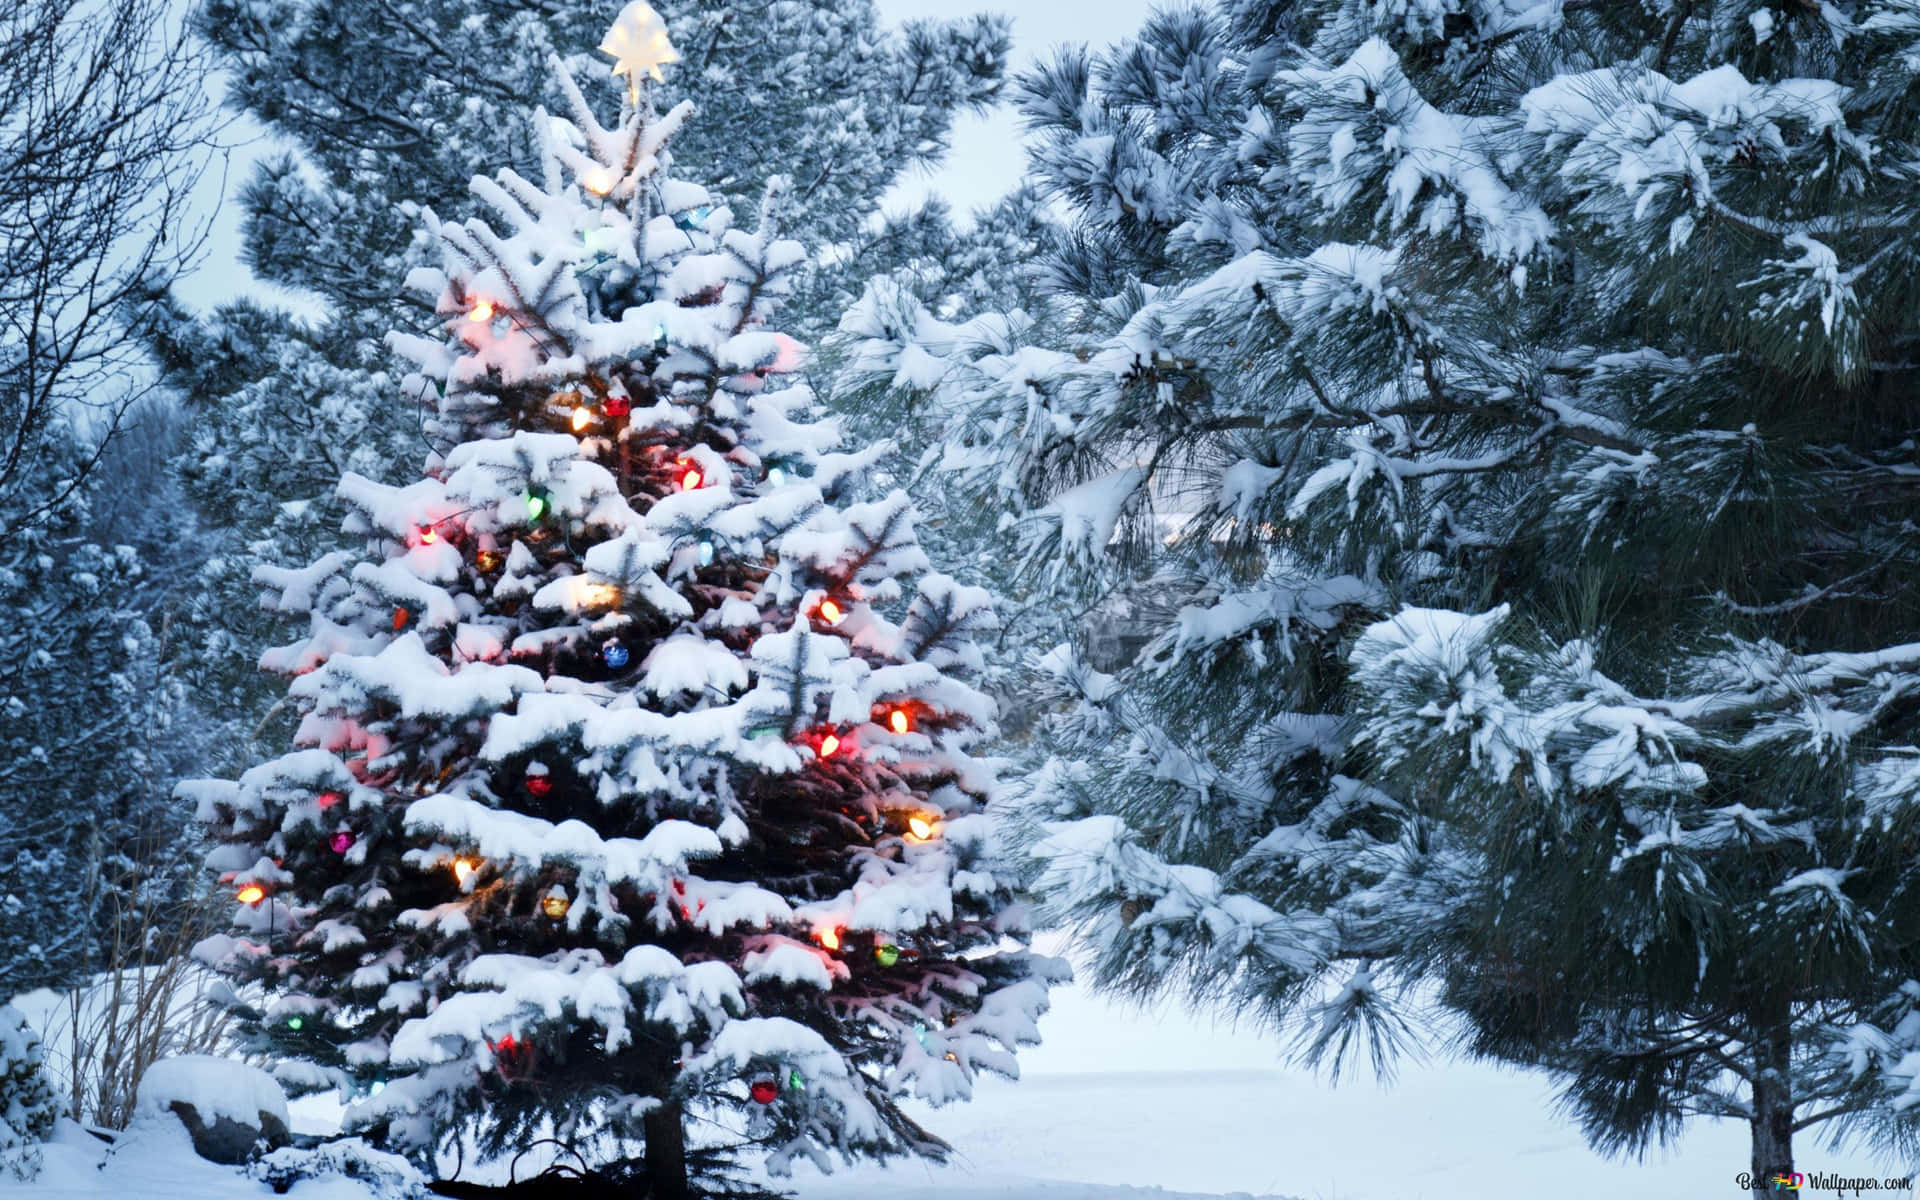 Enjoy the gentle snowfall of the festive Christmas season Description: Celebrate the holidays with a scene of white snow falling against a blue winter sky. Related Keywords: holiday, Christmas, snow, winter, festive, season, snowfall, blue sky Wallpaper